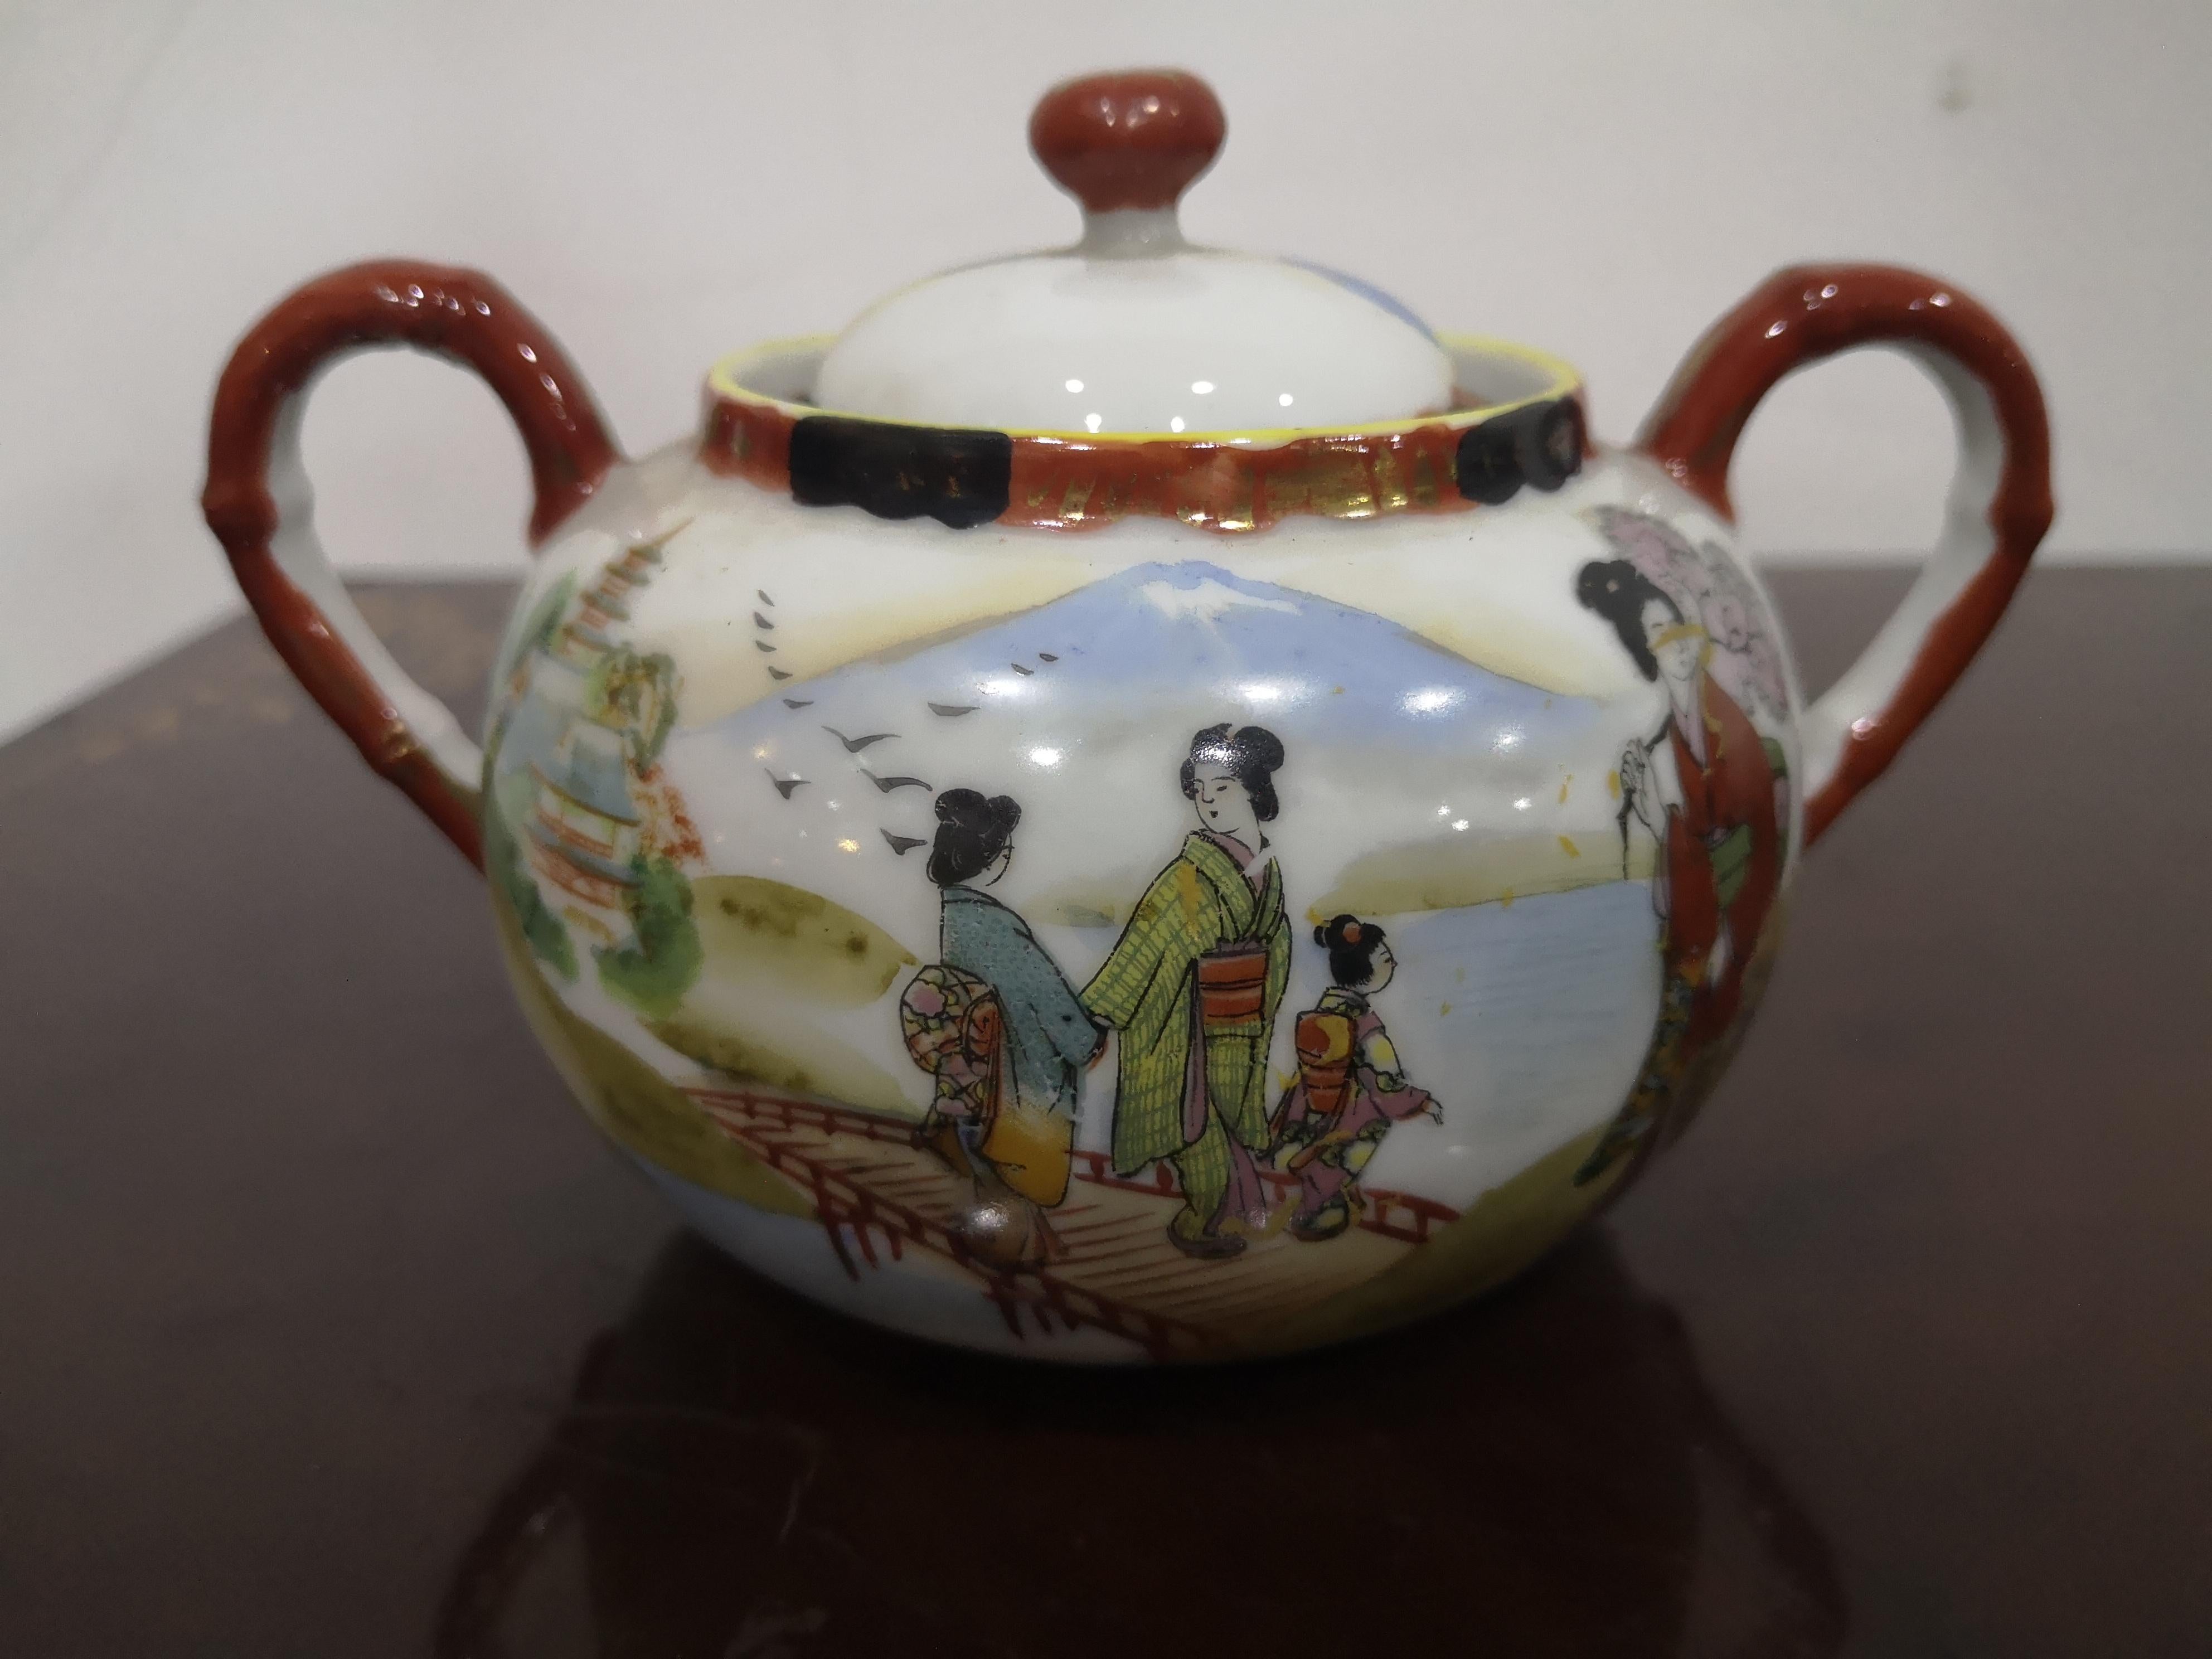 Japanese tea service for 10 in fine mid-19th century porcelain For Sale 5